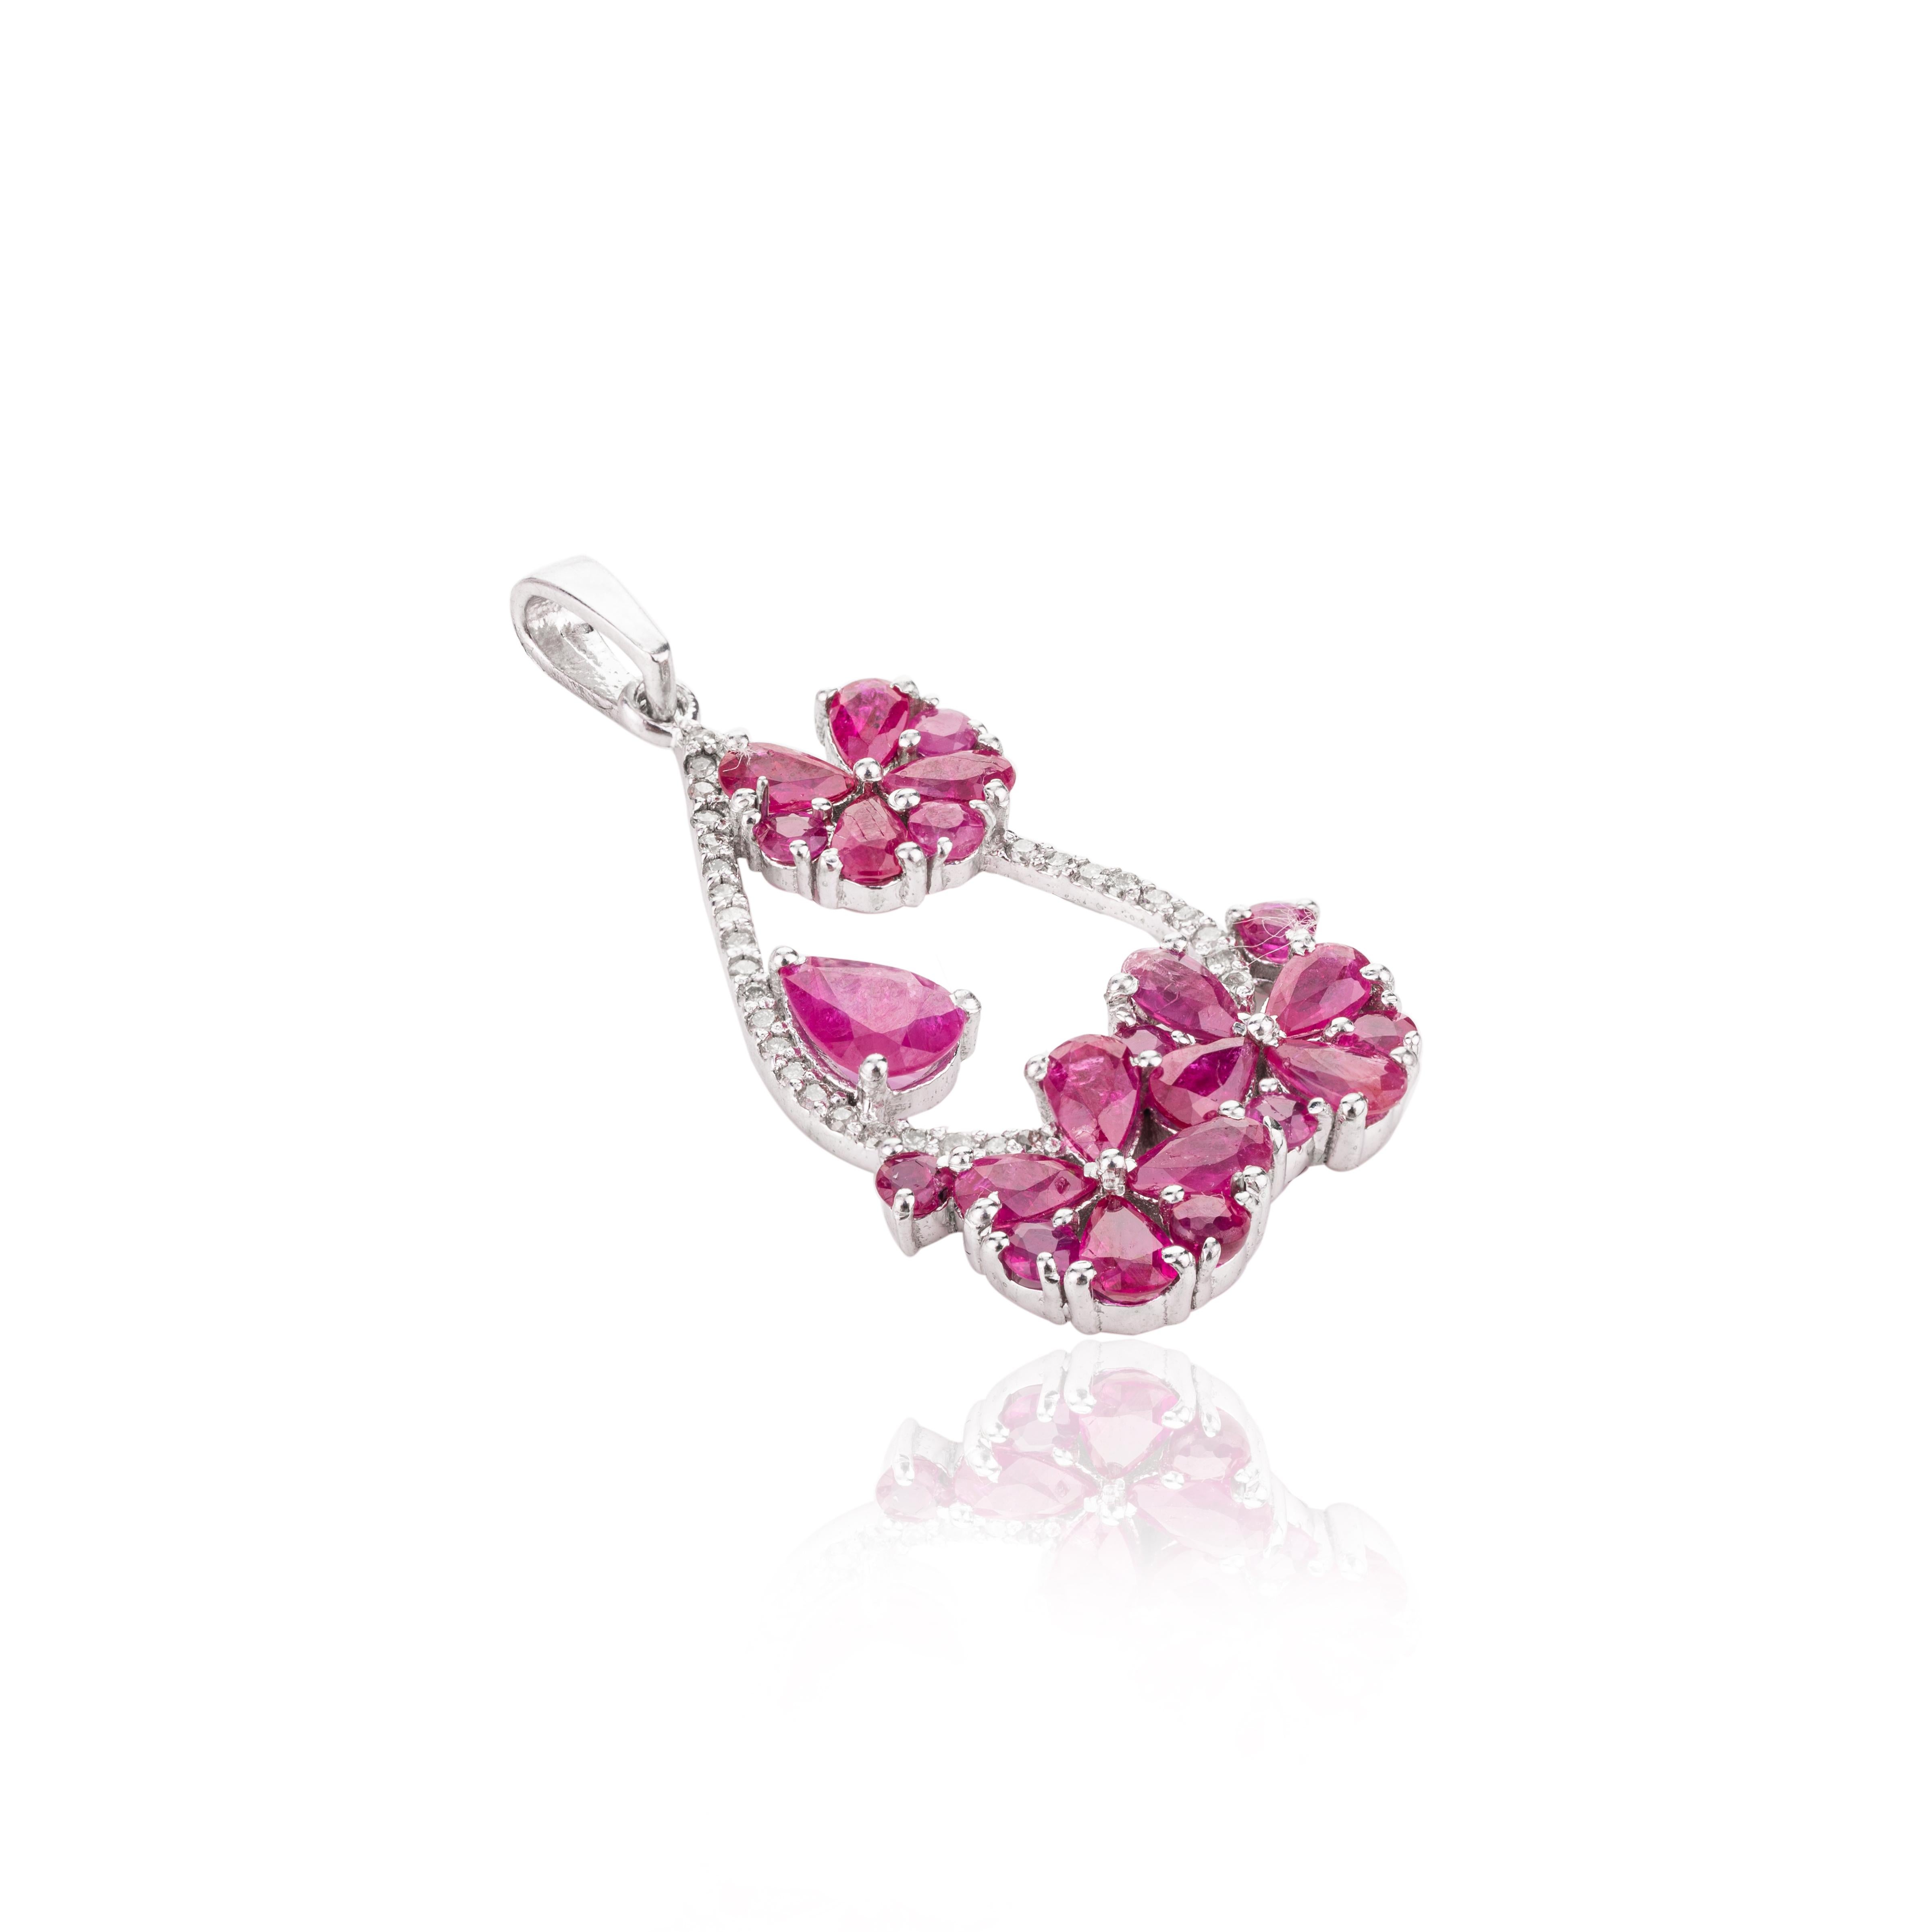 This Genuine Ruby Floral Wedding Pendant is meticulously crafted from the finest materials and adorned with stunning ruby which enhances confidence, leadership qualities and attract career opportunities.
This delicate to statement pendants, suits